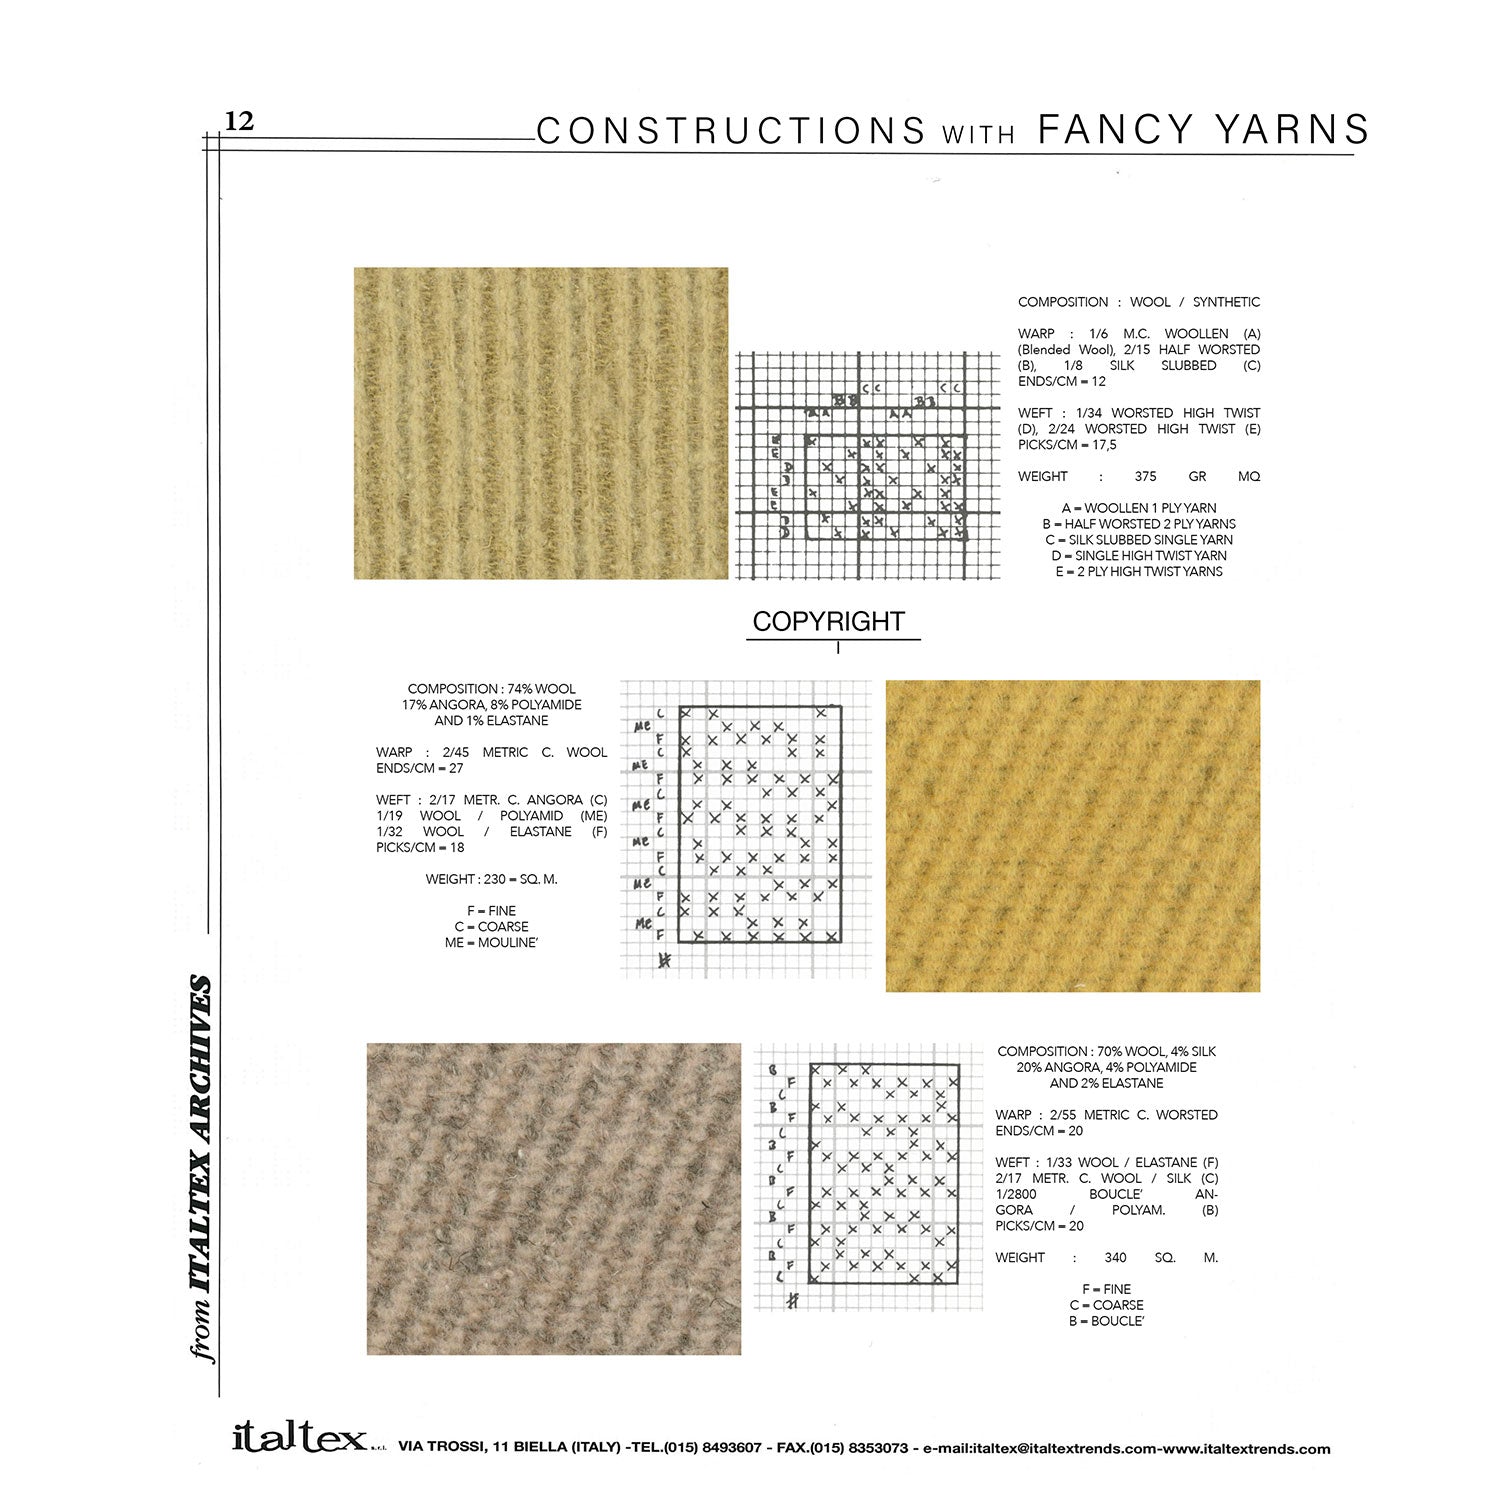 Constructions with fancy yarns